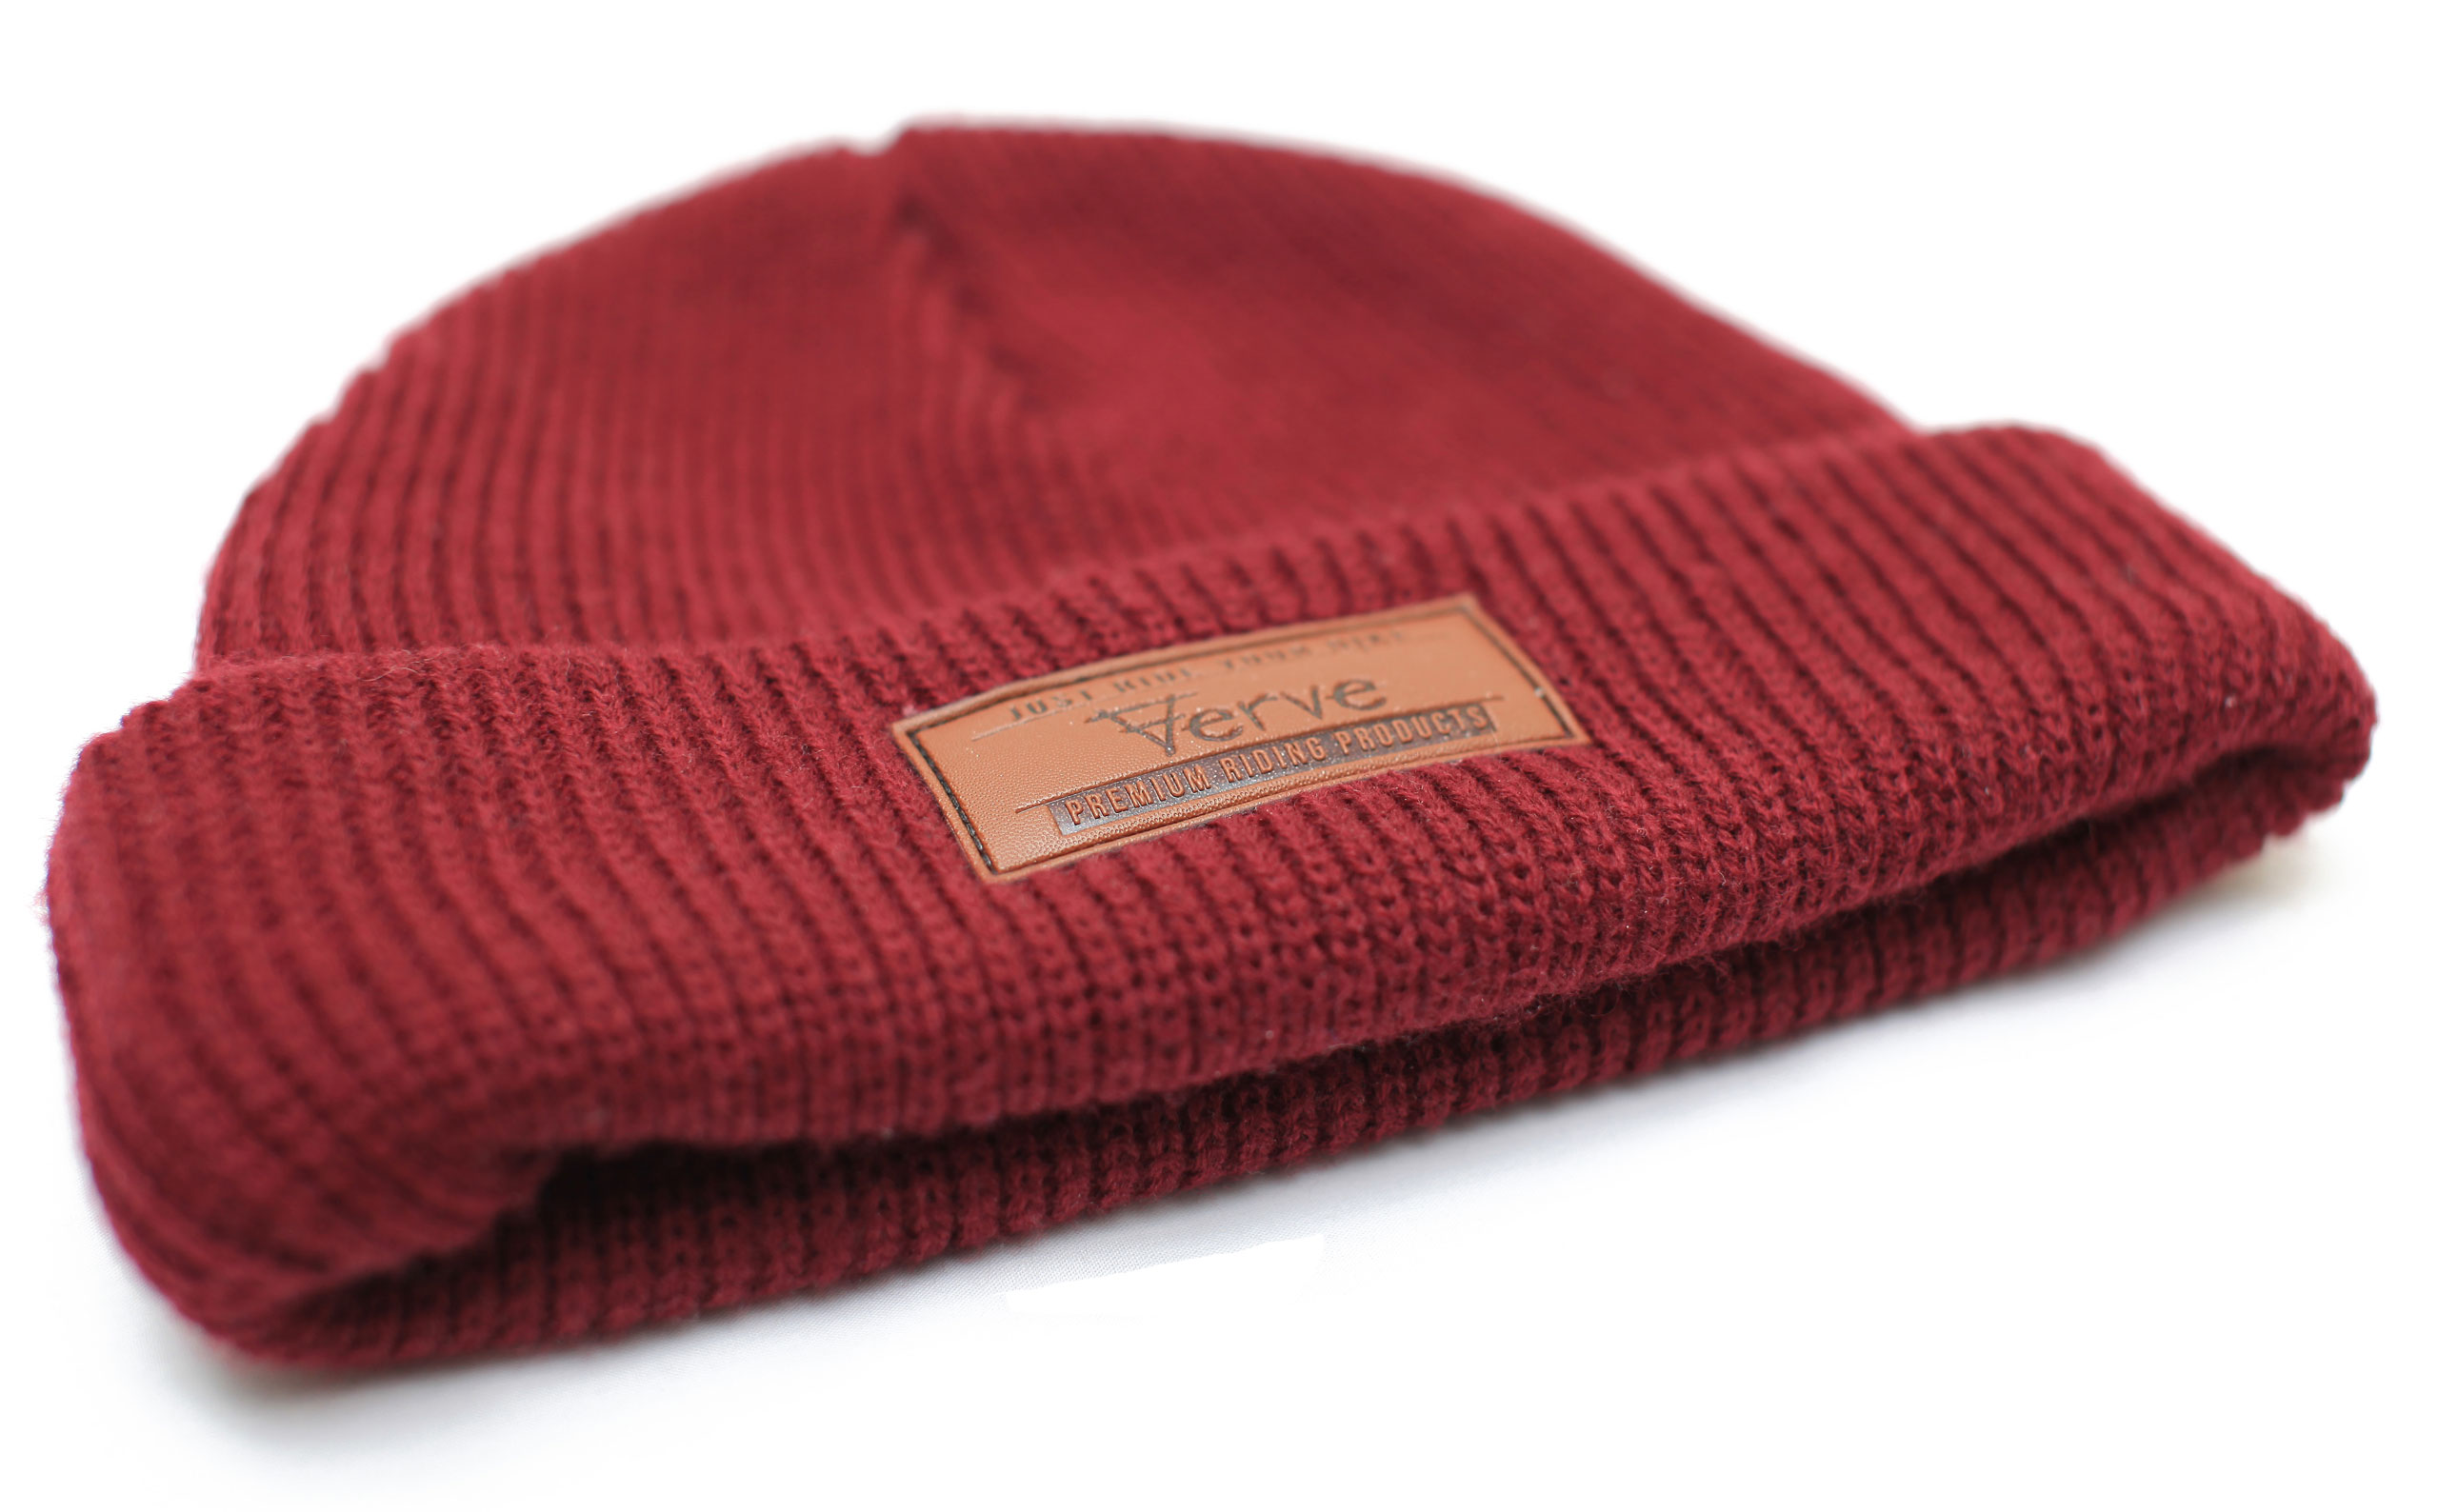 JRYB leather patch beanie